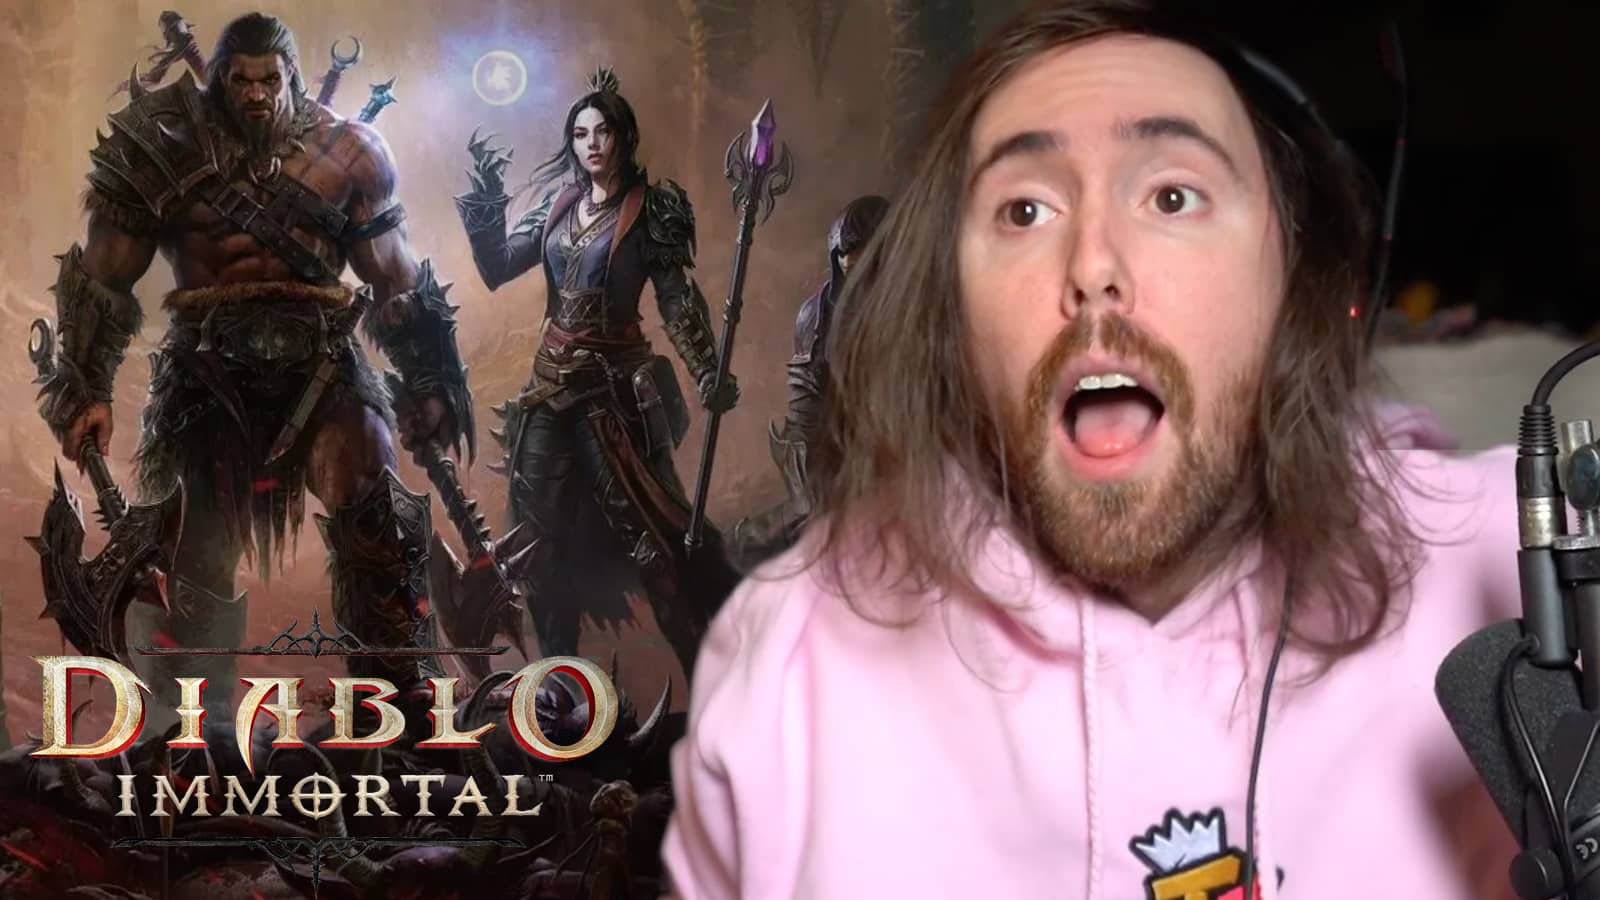 Asmongold comments on Diablo Immortal's Blood Knight trailer